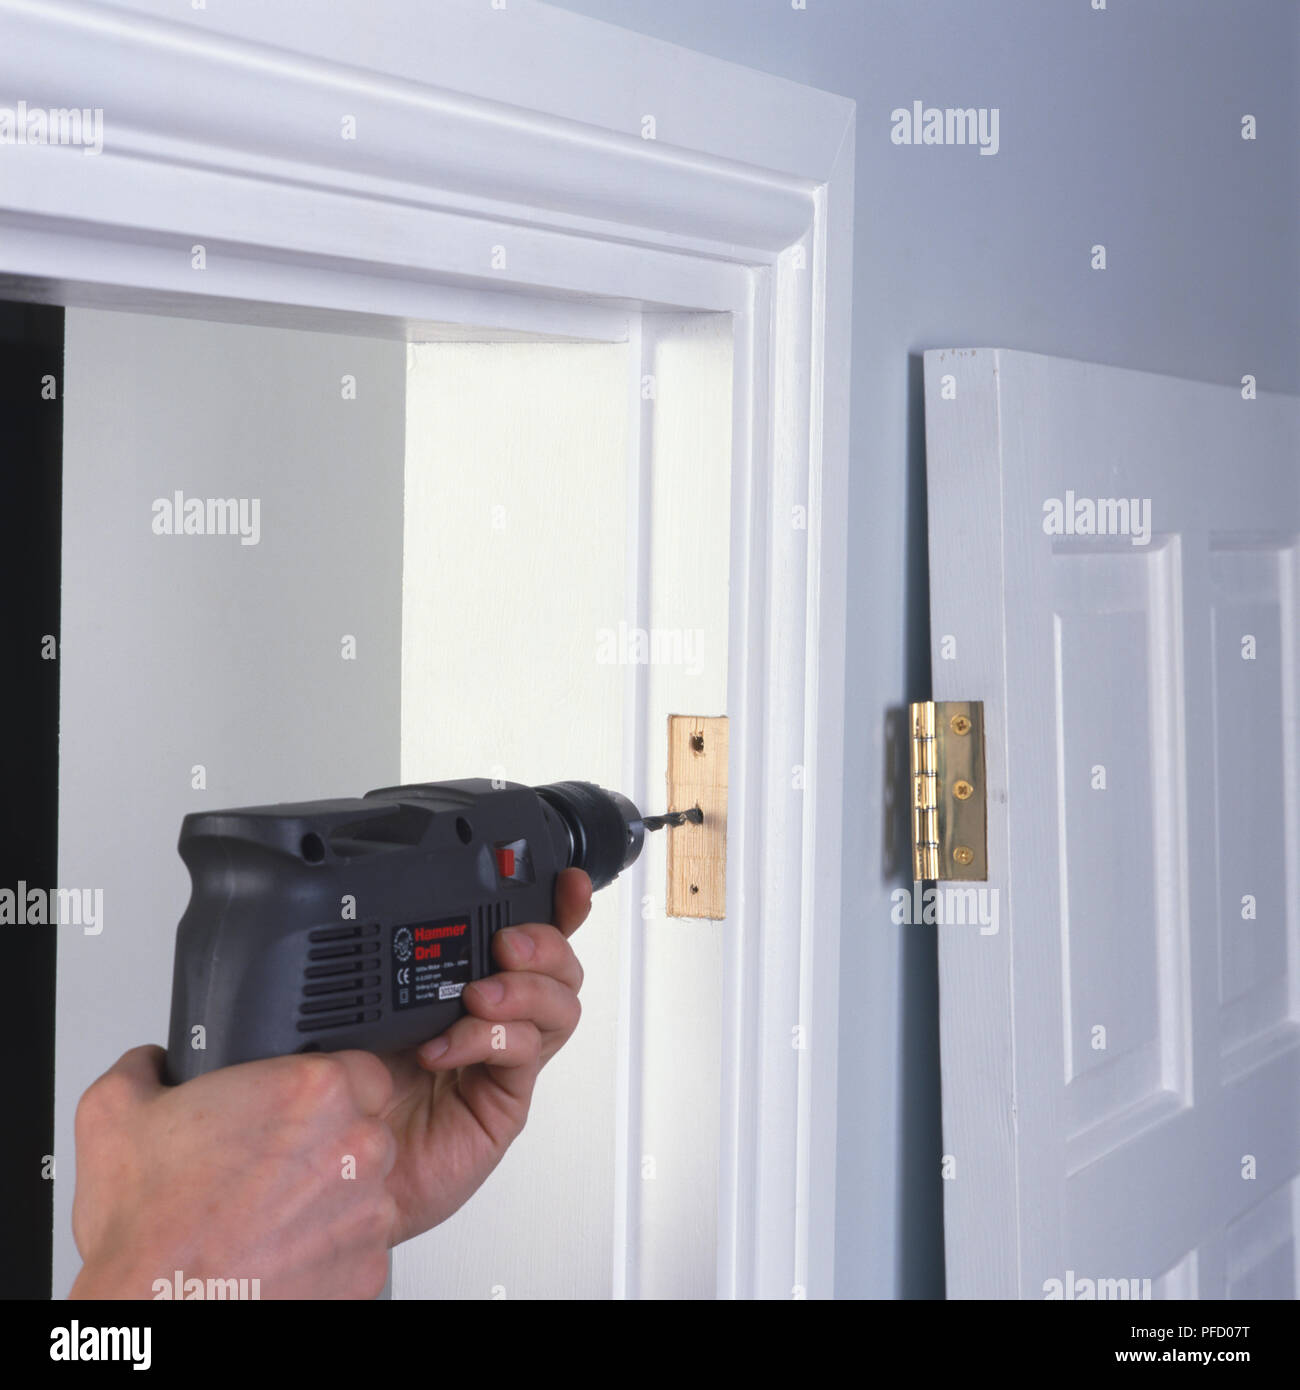 Person drilling holes into door frame with door leaning against the wall, front view Stock Photo